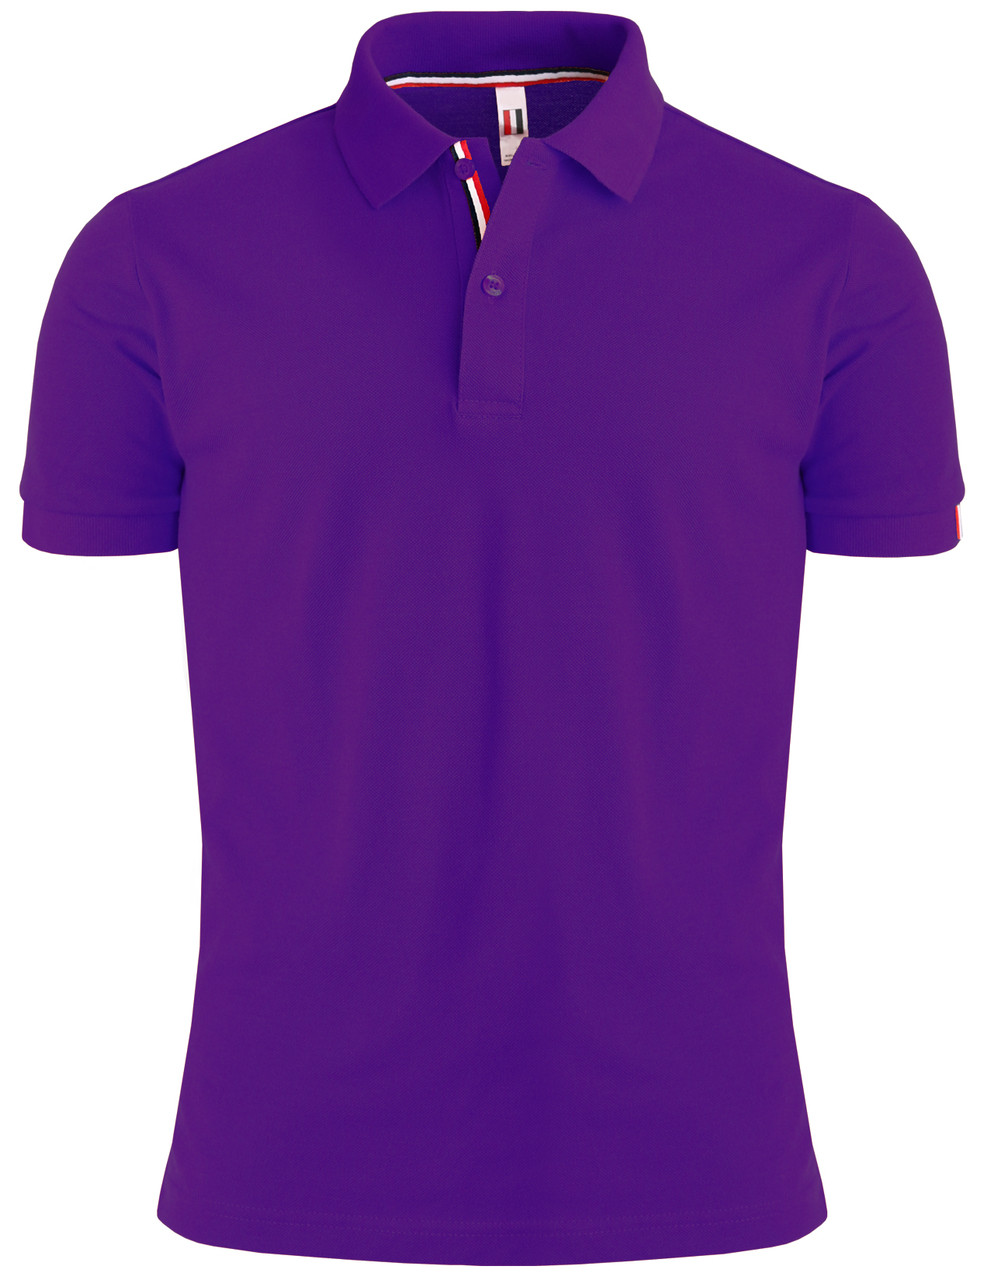 Short Sleeve Pique solid Polo Shirts